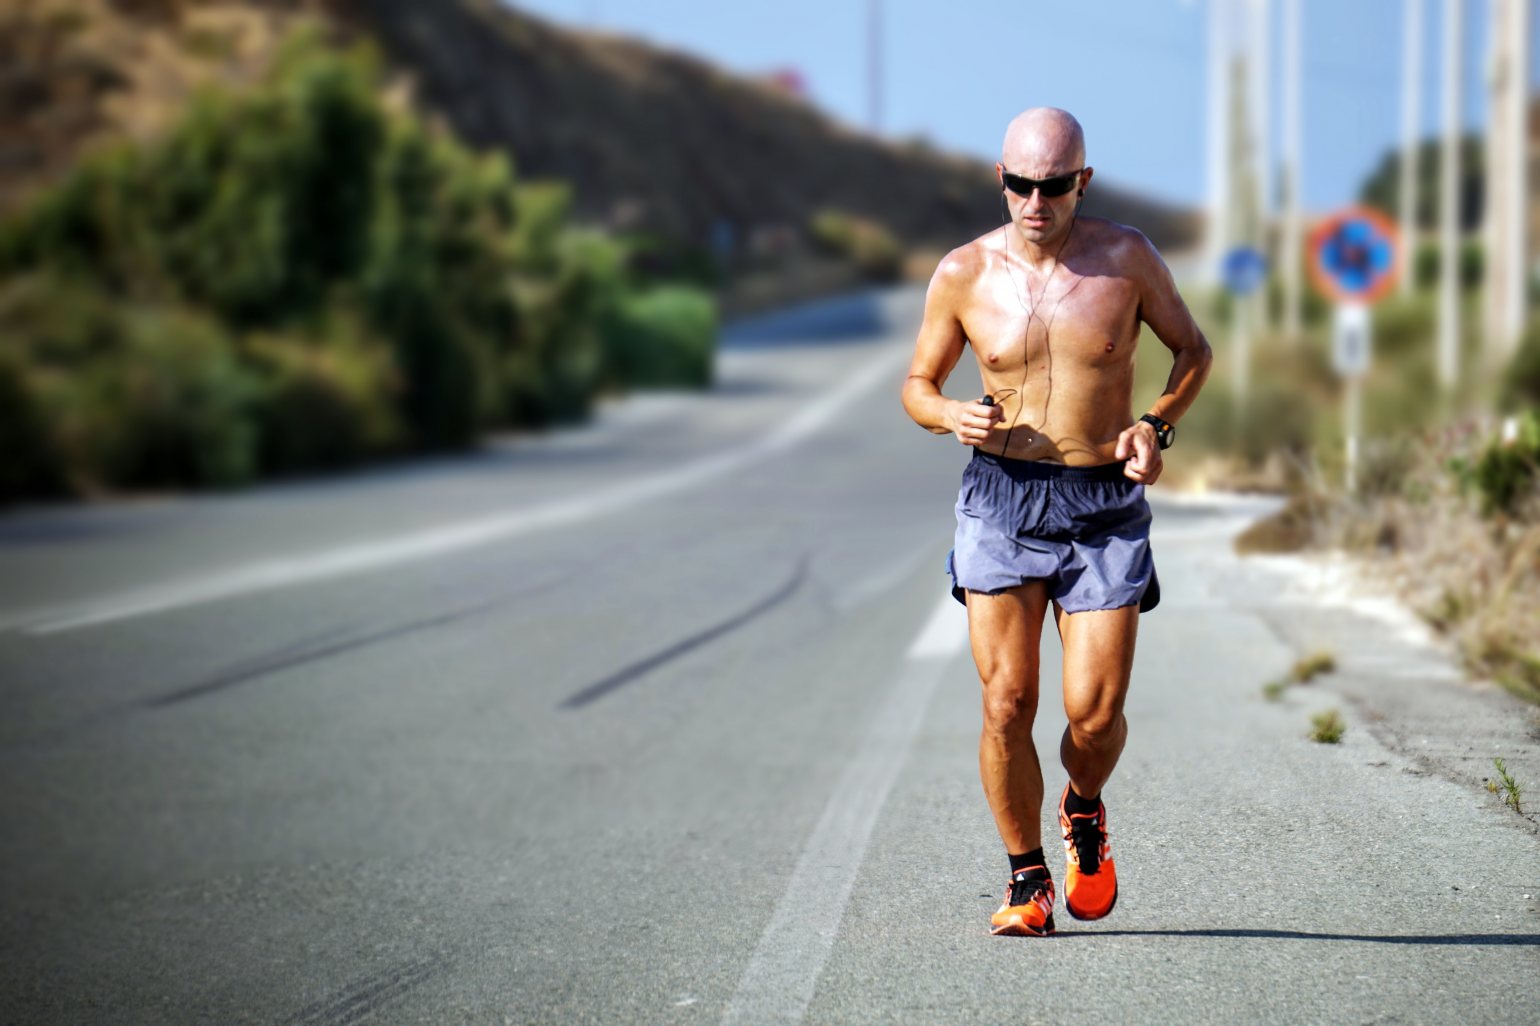 Bald man with sunglasses, hit and sweaty running along a road on a hot day.